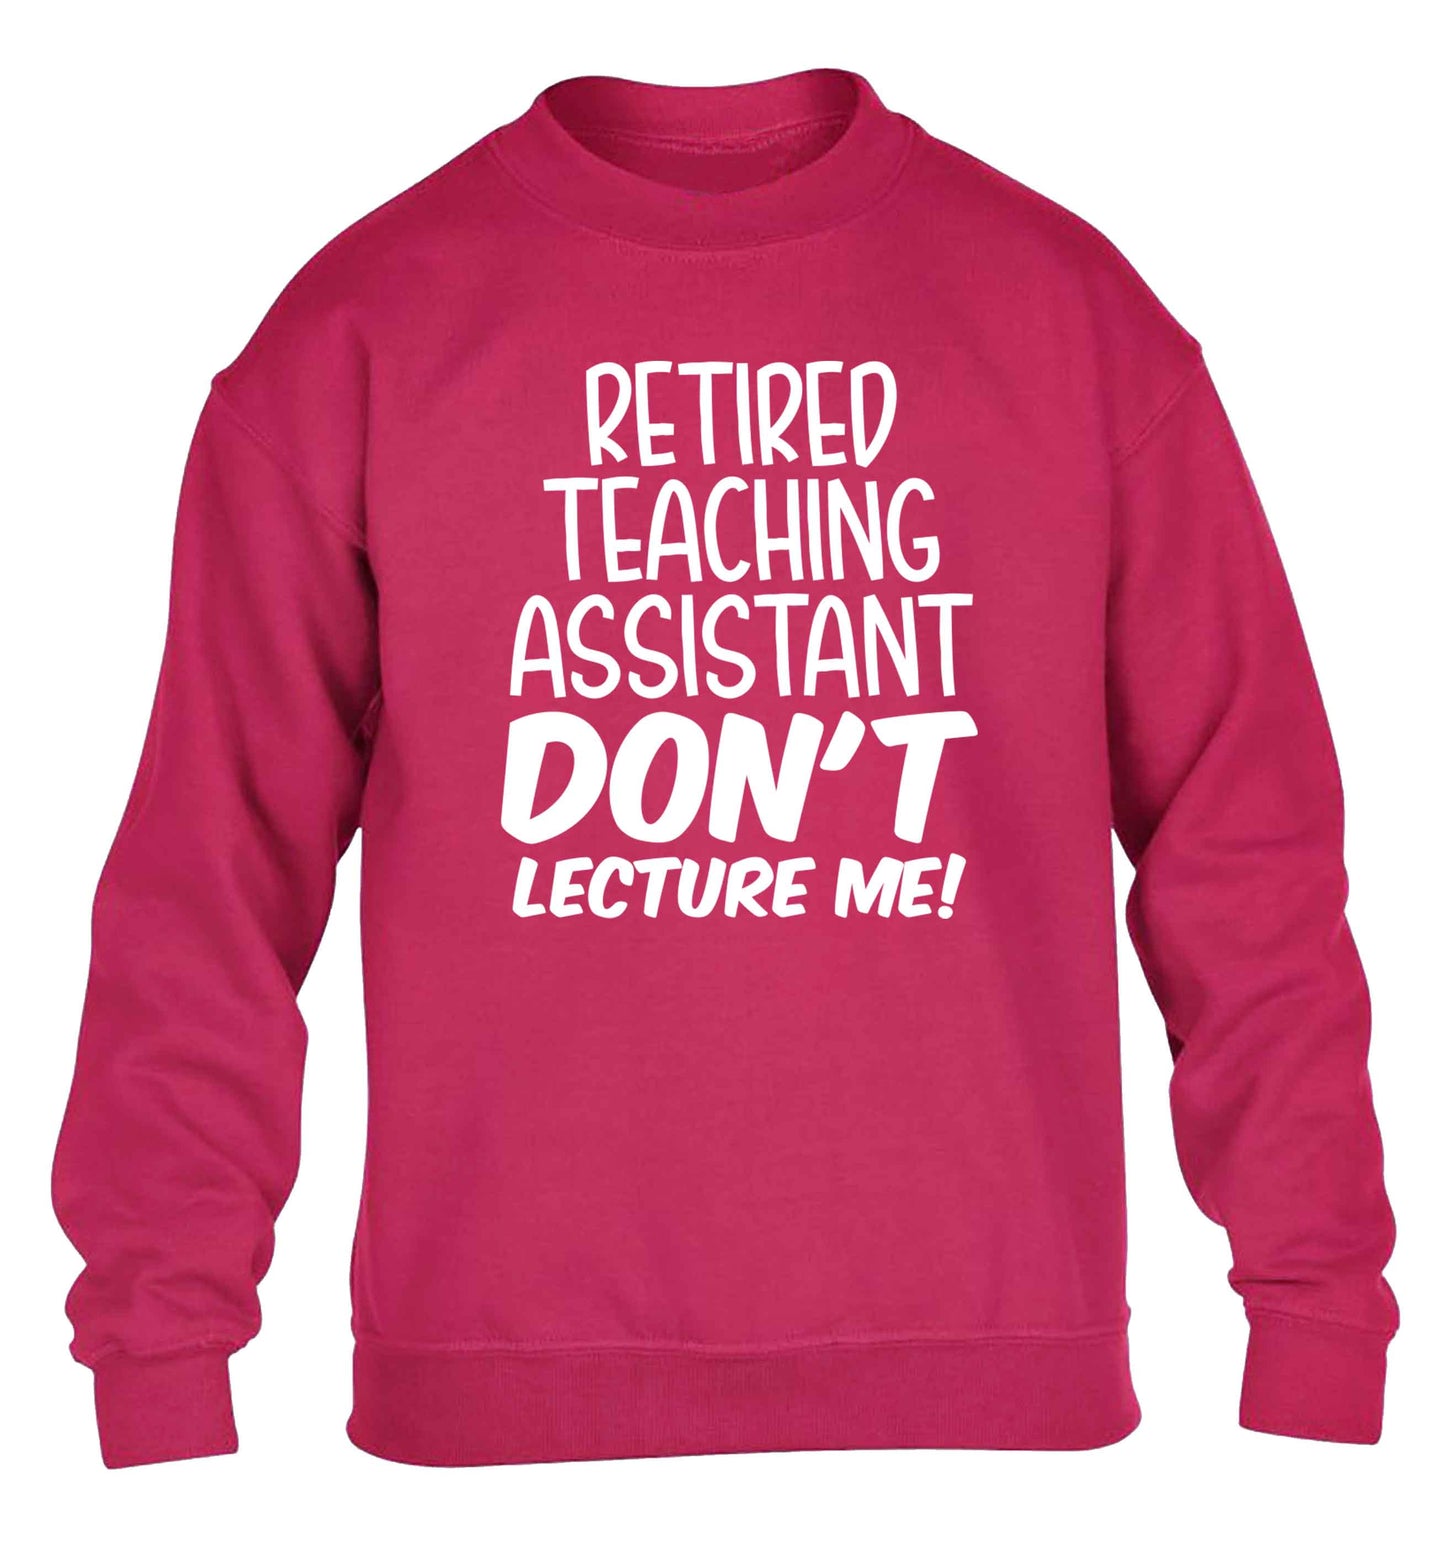 Retired teaching assistant don't lecture me children's pink sweater 12-13 Years